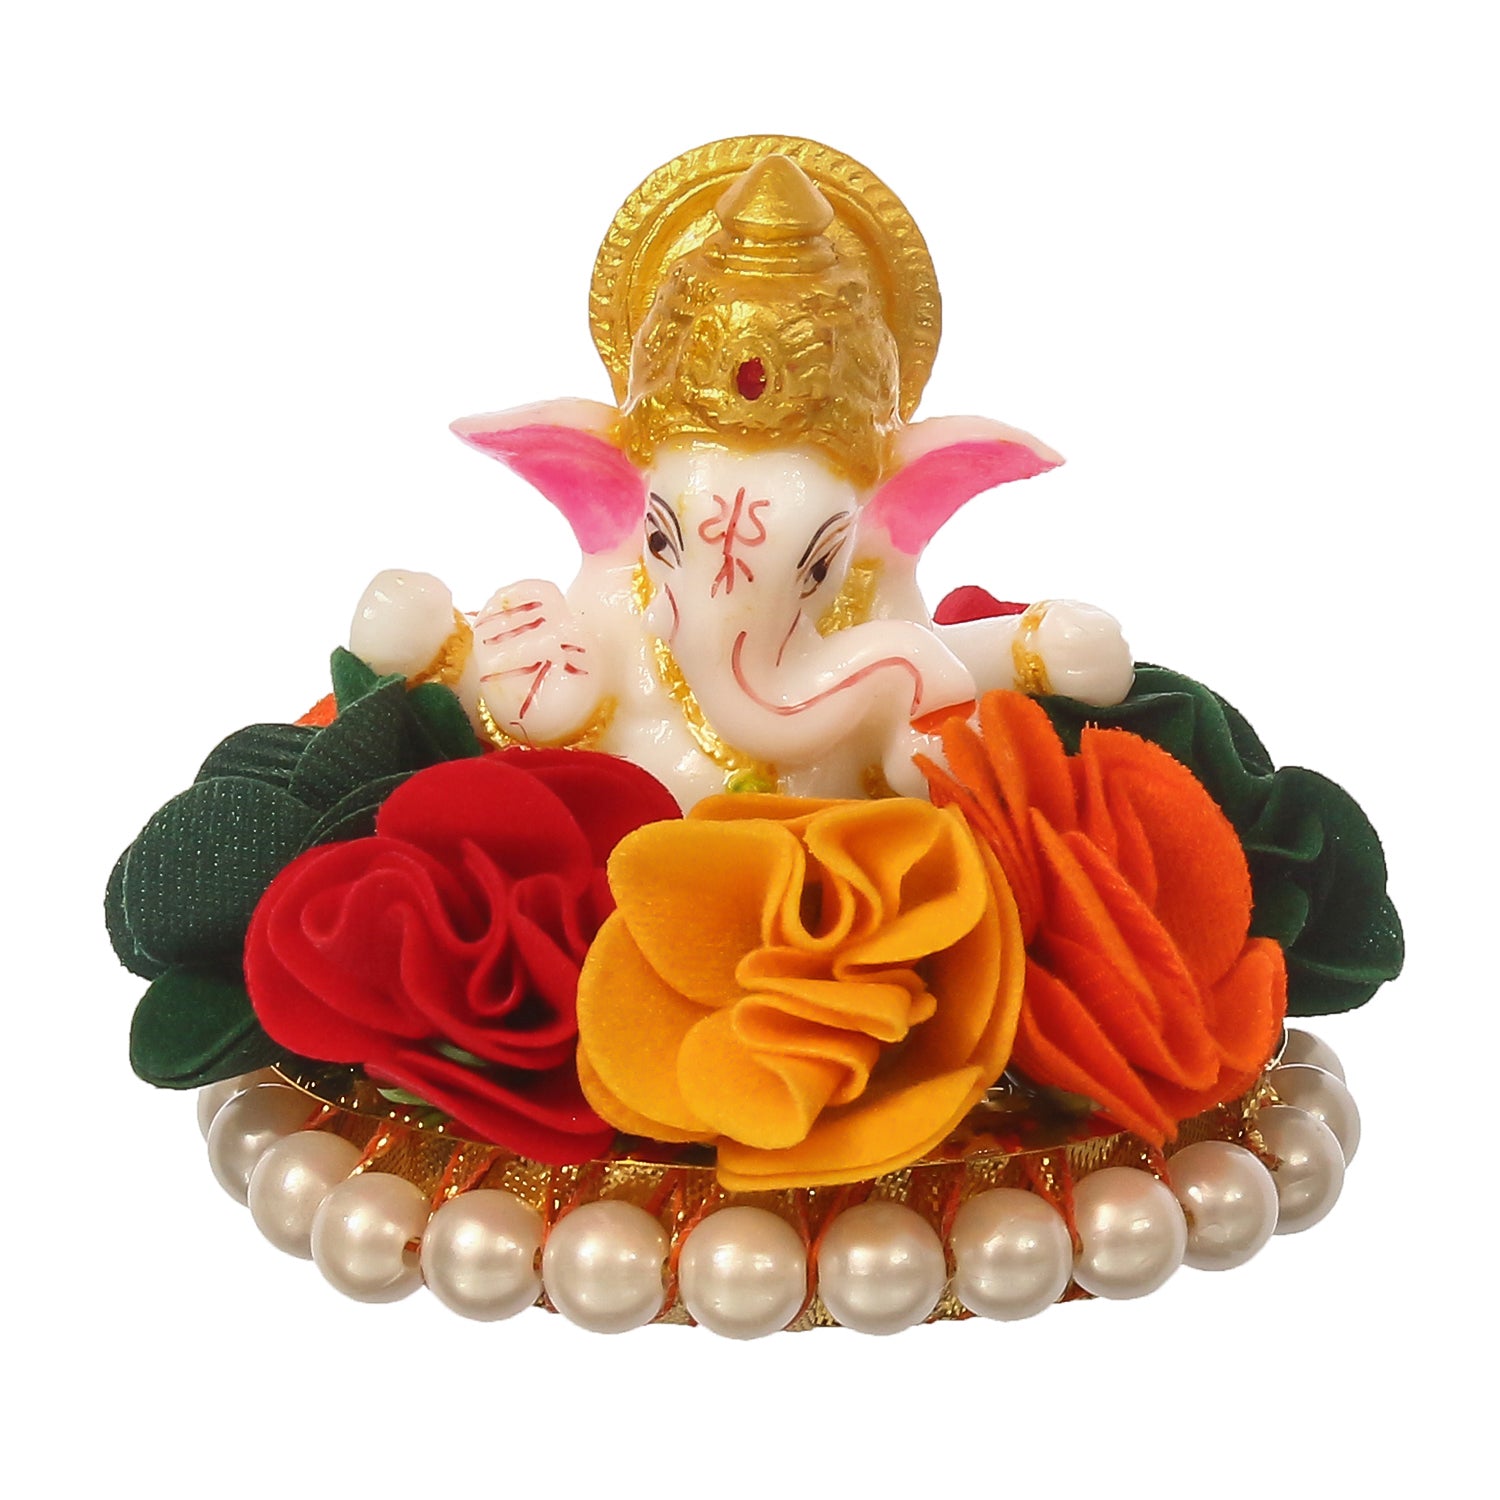 Lord Ganesha Idol on Decorative Handcrafted Plate with Colorful Flowers 2